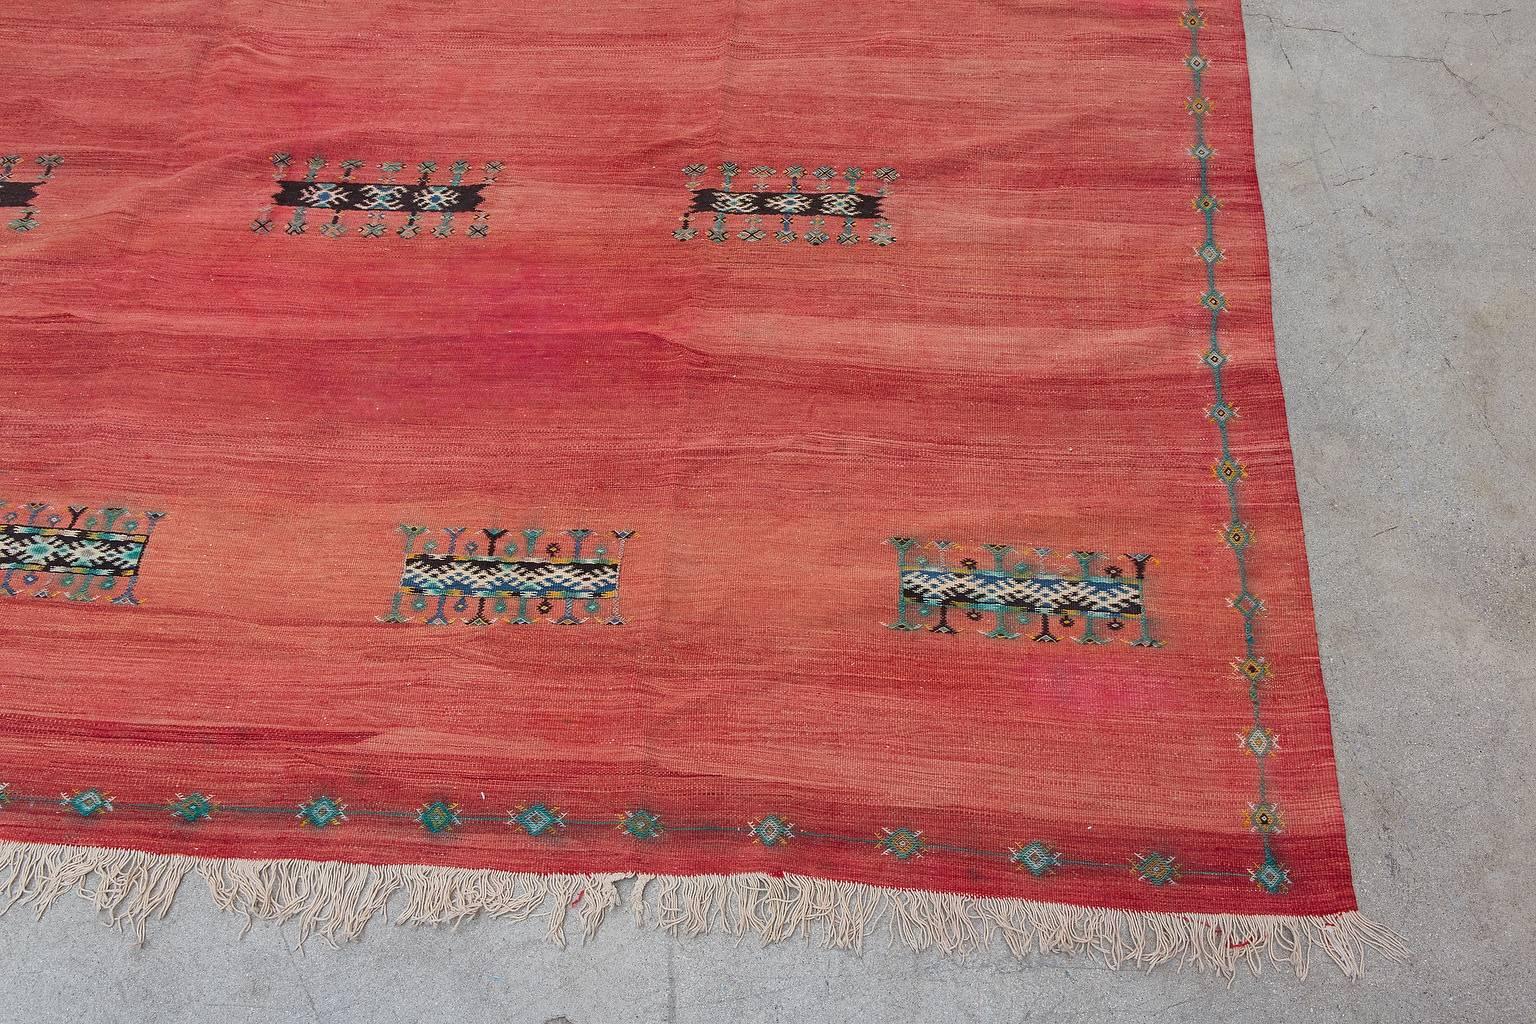 Ait Ouaouzguite tribe who reside in the Siroua Mountains in Southern High Atlas Morocco. Plain-woven fabrics with additional tapestry-weave designs are known in the region inhabited by the Ait Ouaouzguite tribe. This flat-weave is no exception with